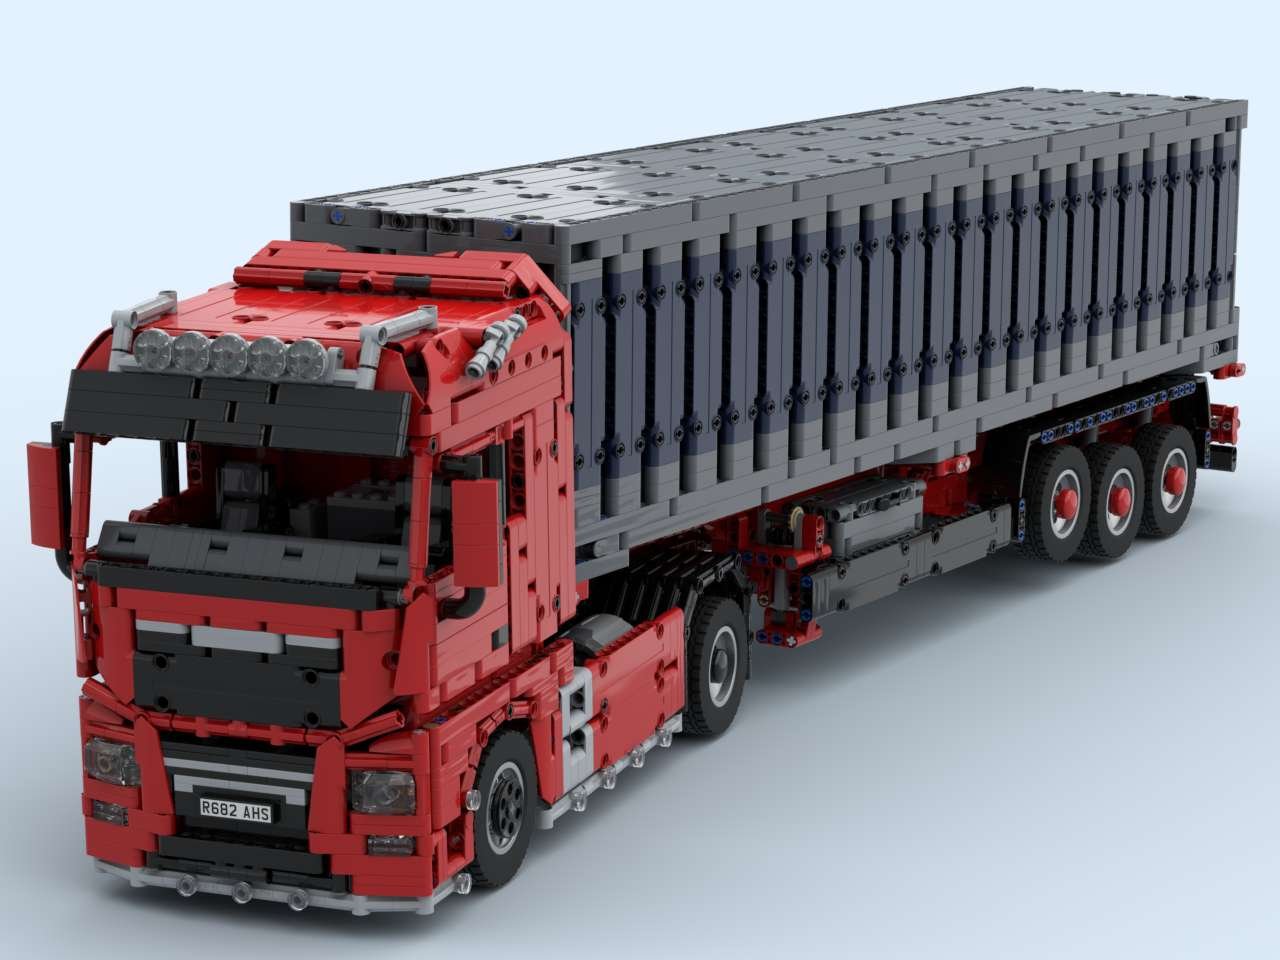 MOC] MAN TGX 18.500 Semi Tractor - LEGO Technic, Mindstorms, Model Team and  Scale Modeling - Eurobricks Forums